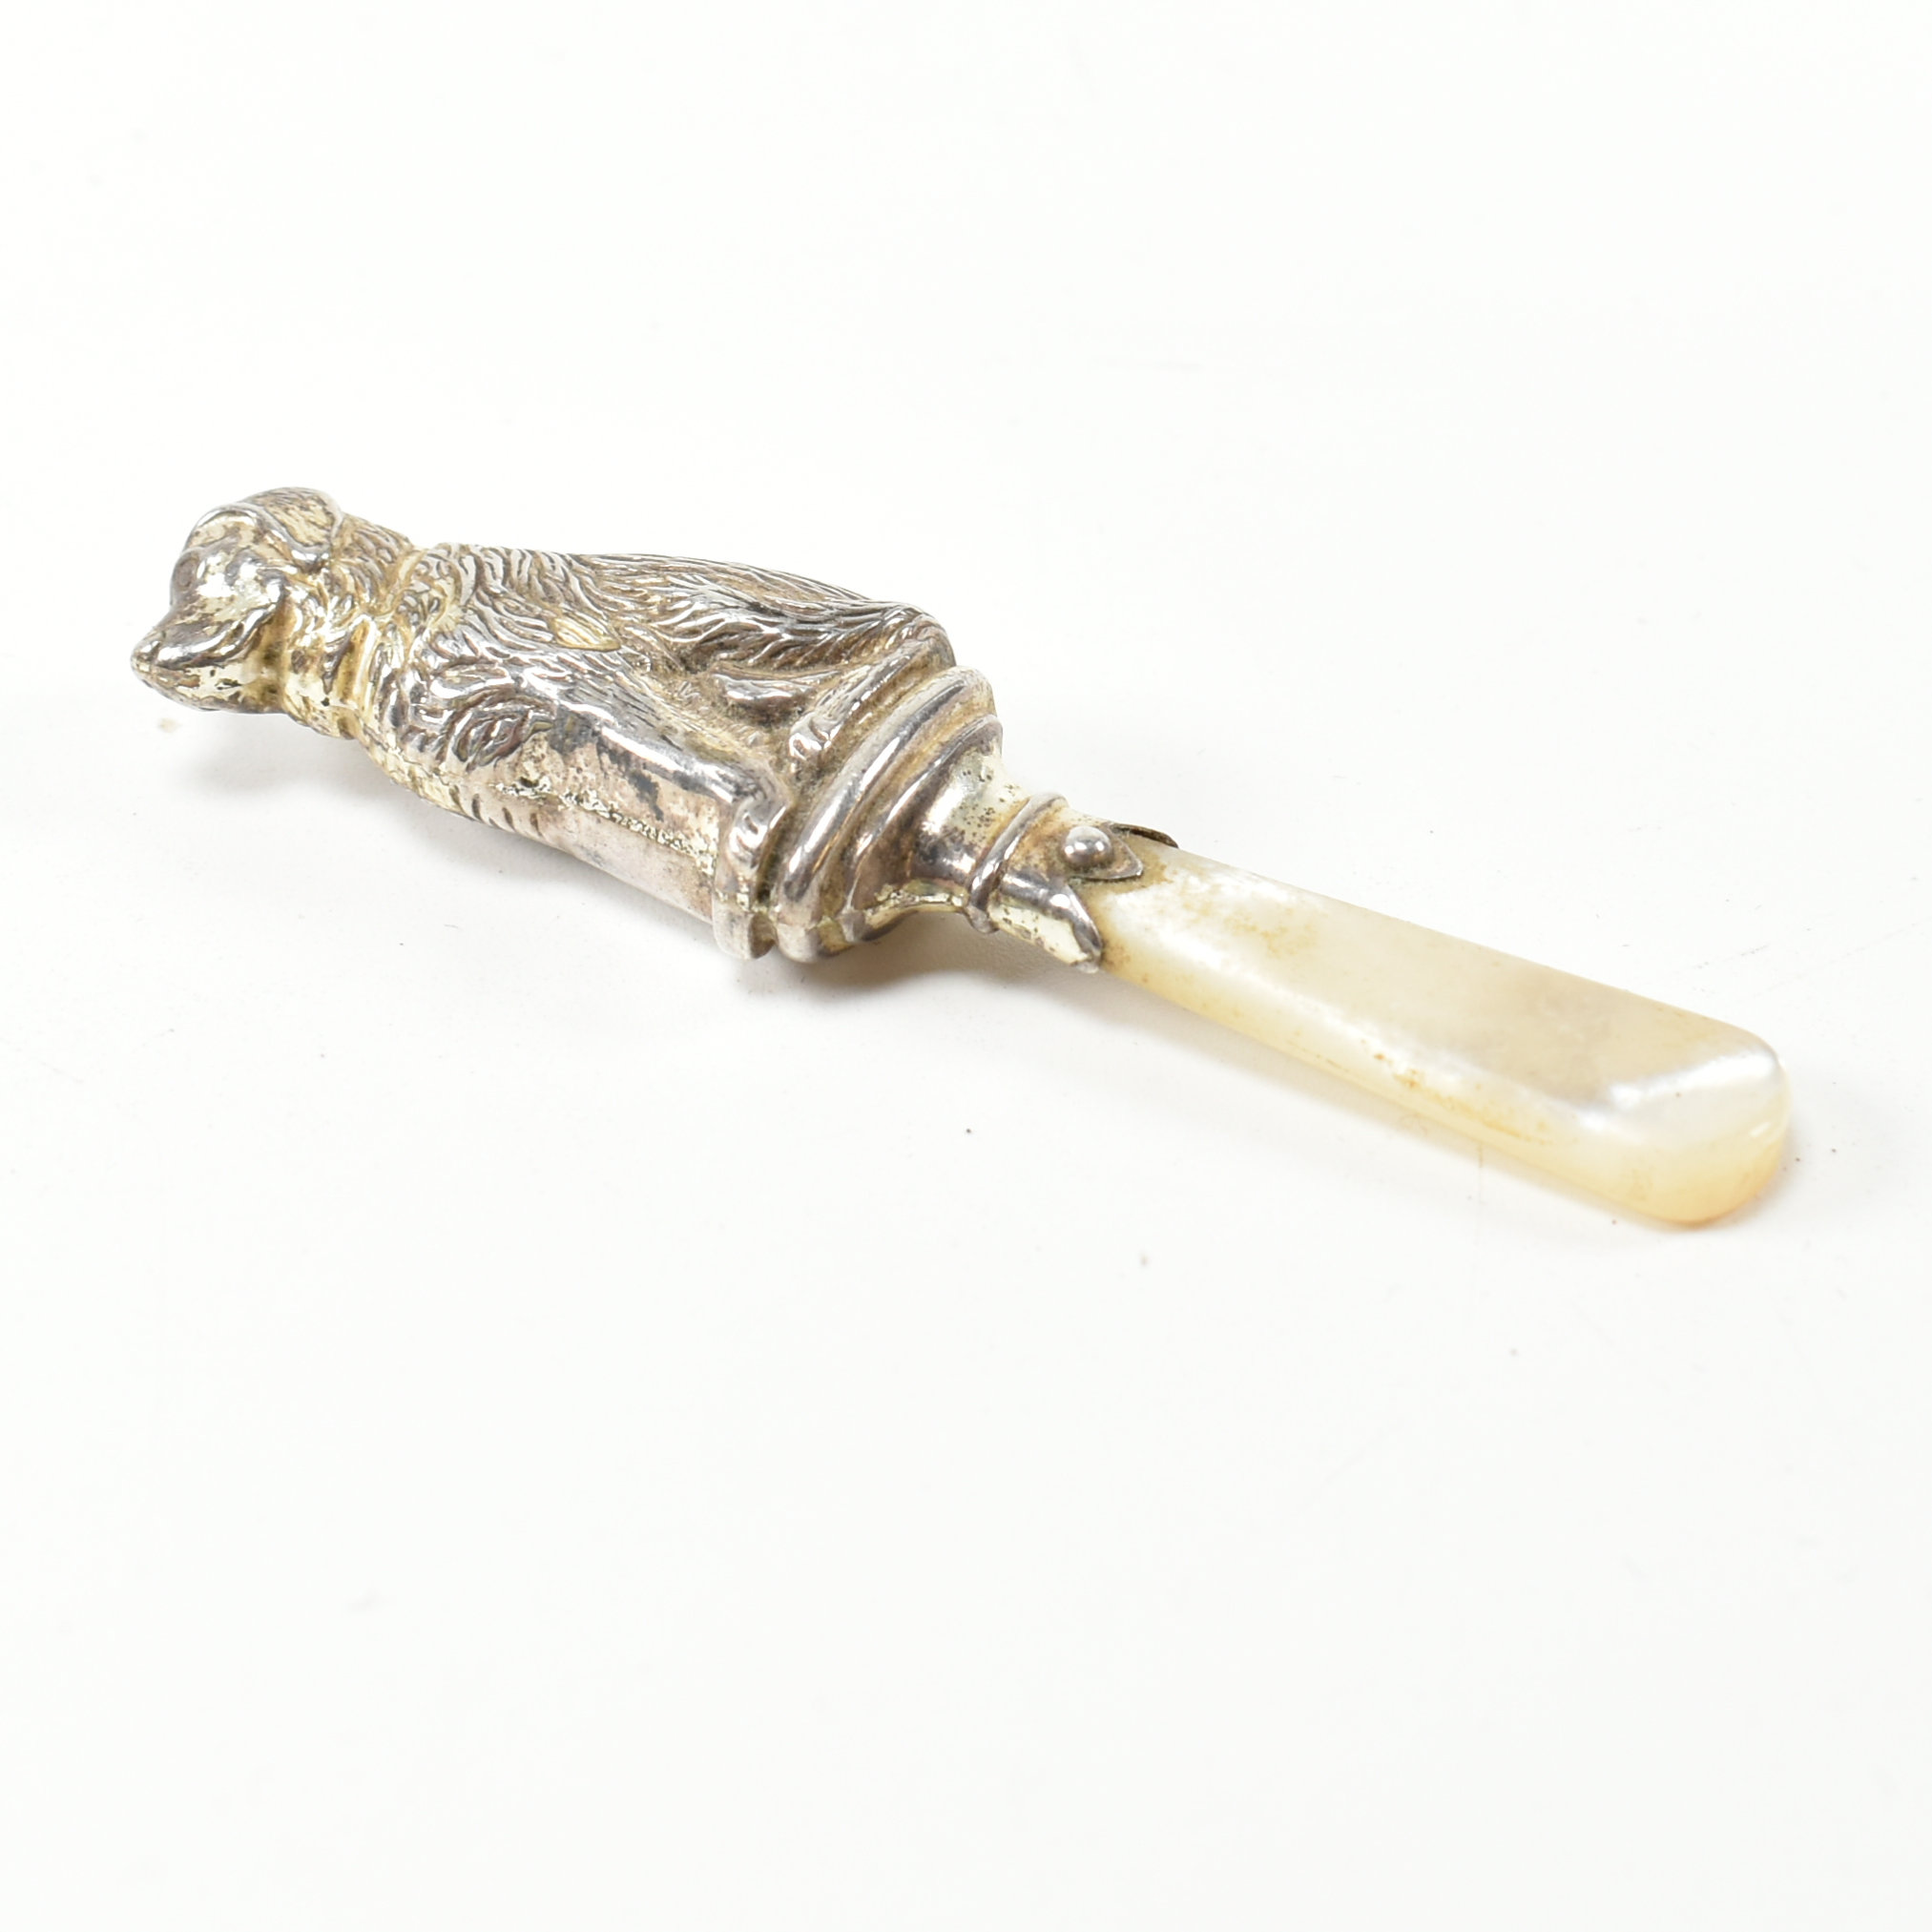 VICTORIAN HALLMARKED SILVER COMBINATION RATTLE TEETHER DOG - Image 4 of 6